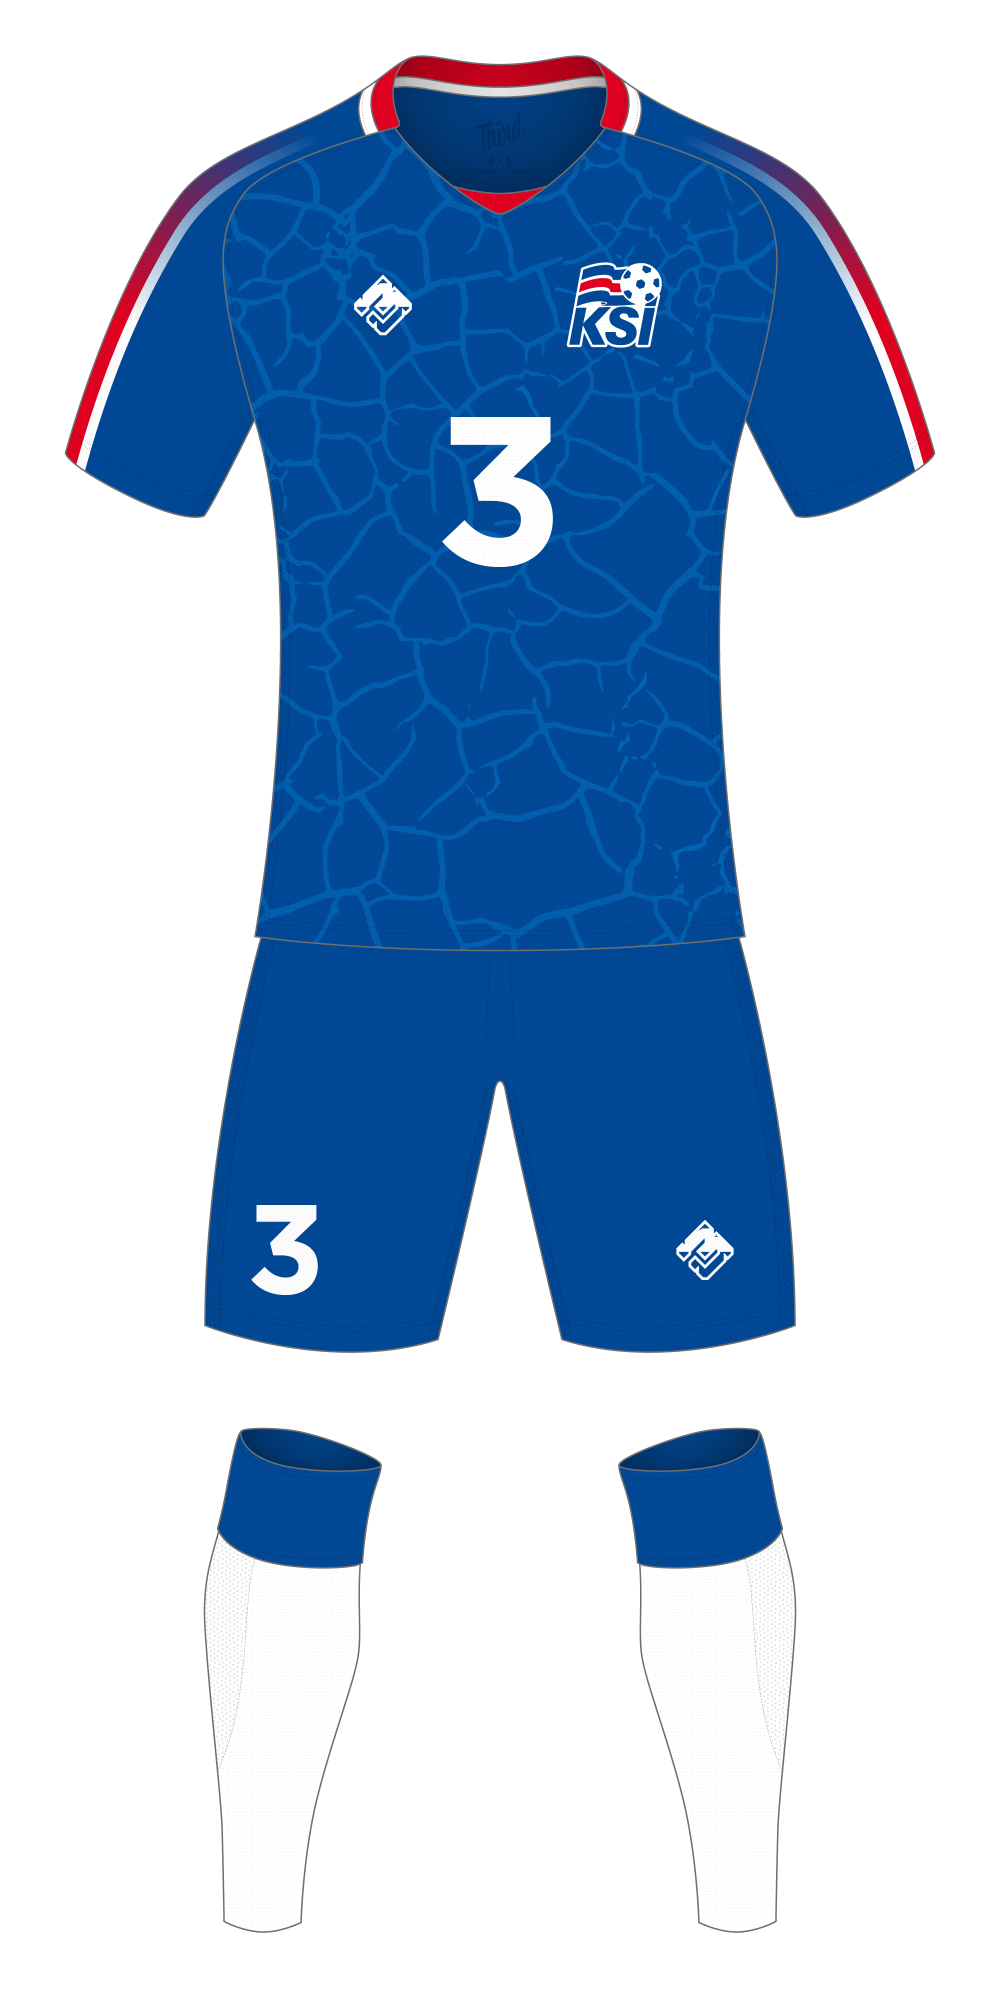 Iceland World Cup 2018 concept